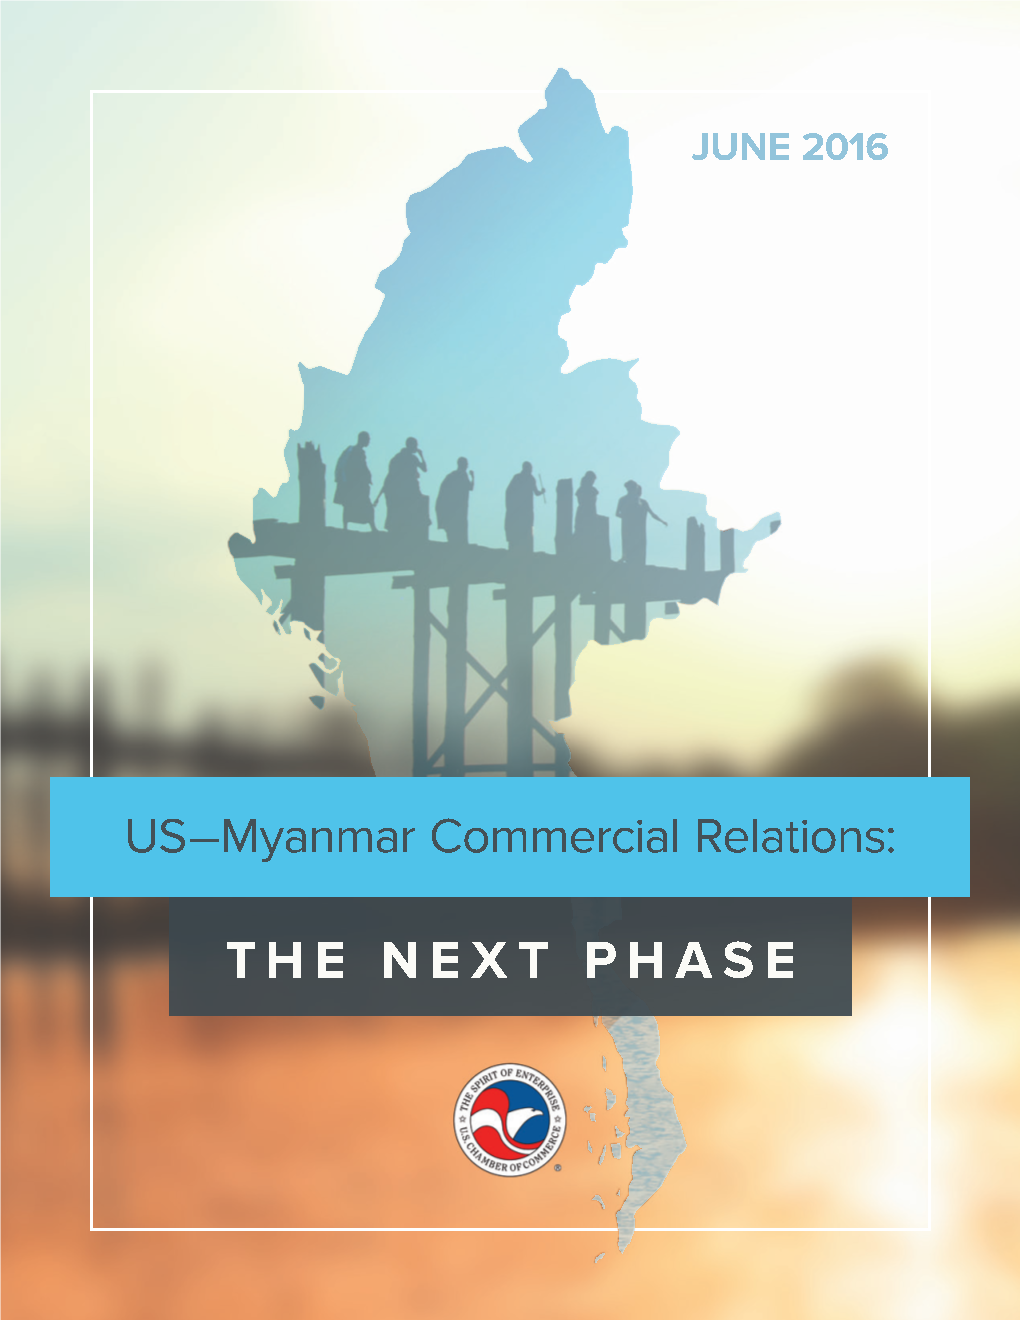 US-Myanmar Commercial Relations: the Next Phase